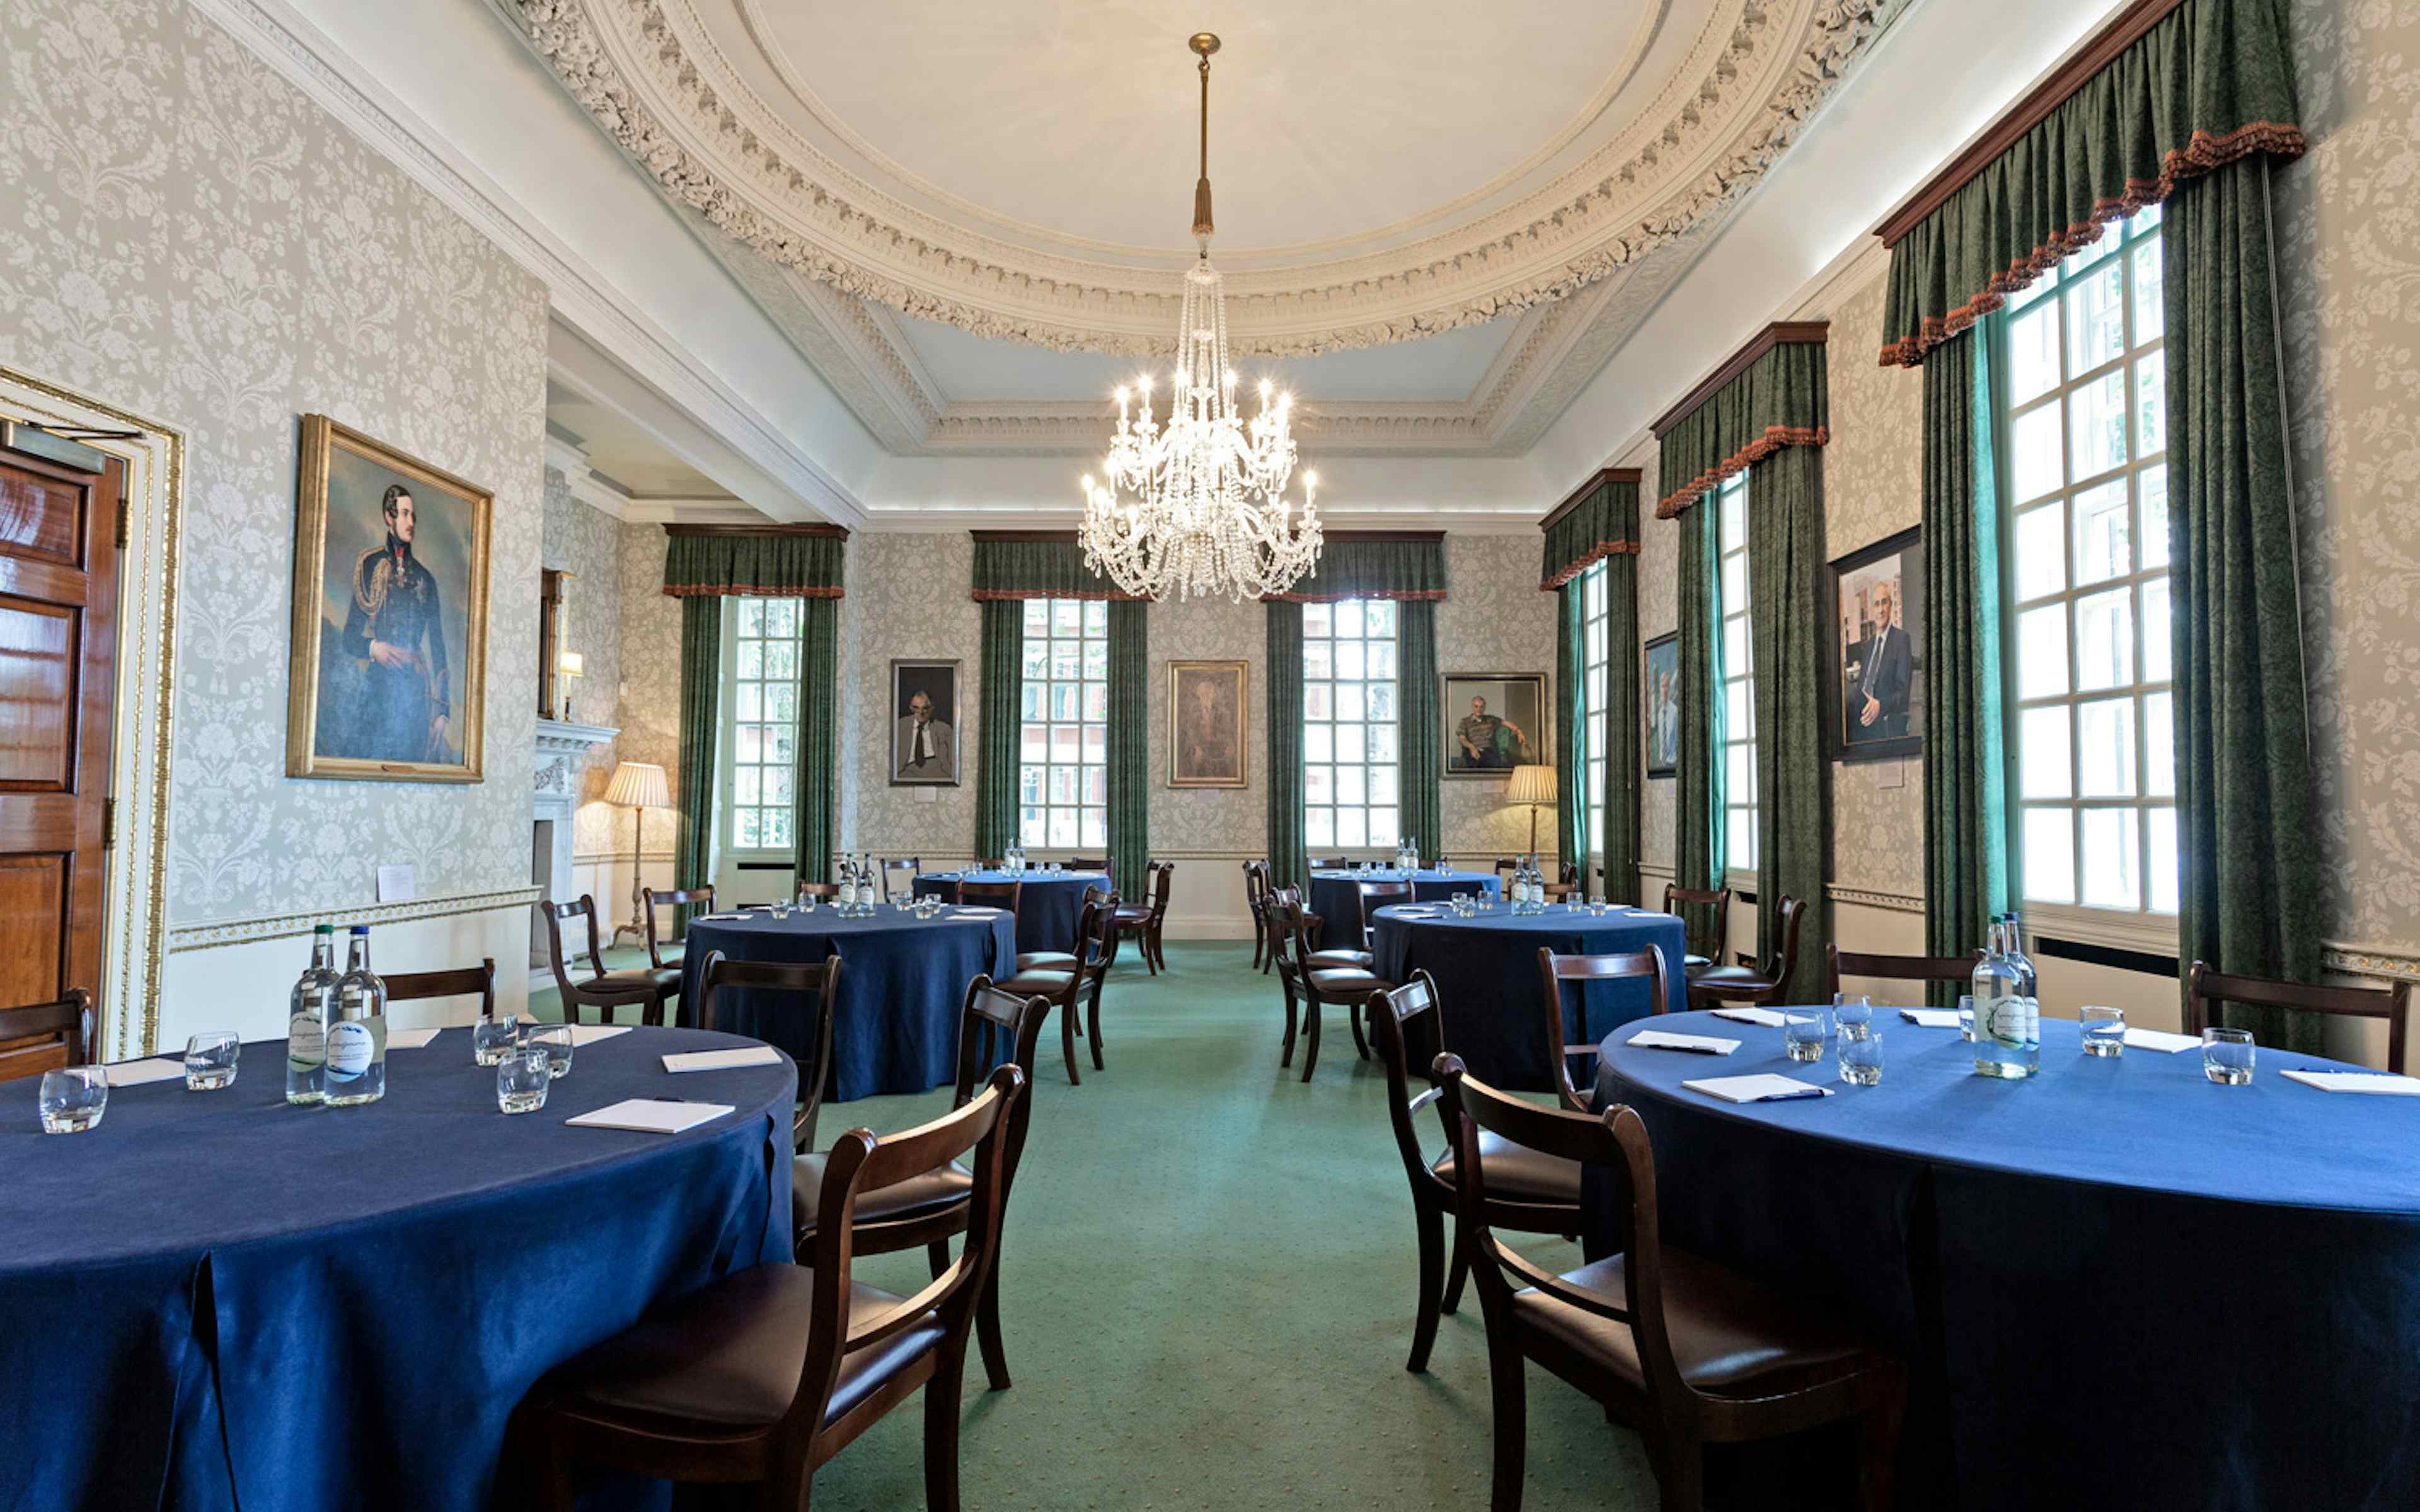 The Council Room - image